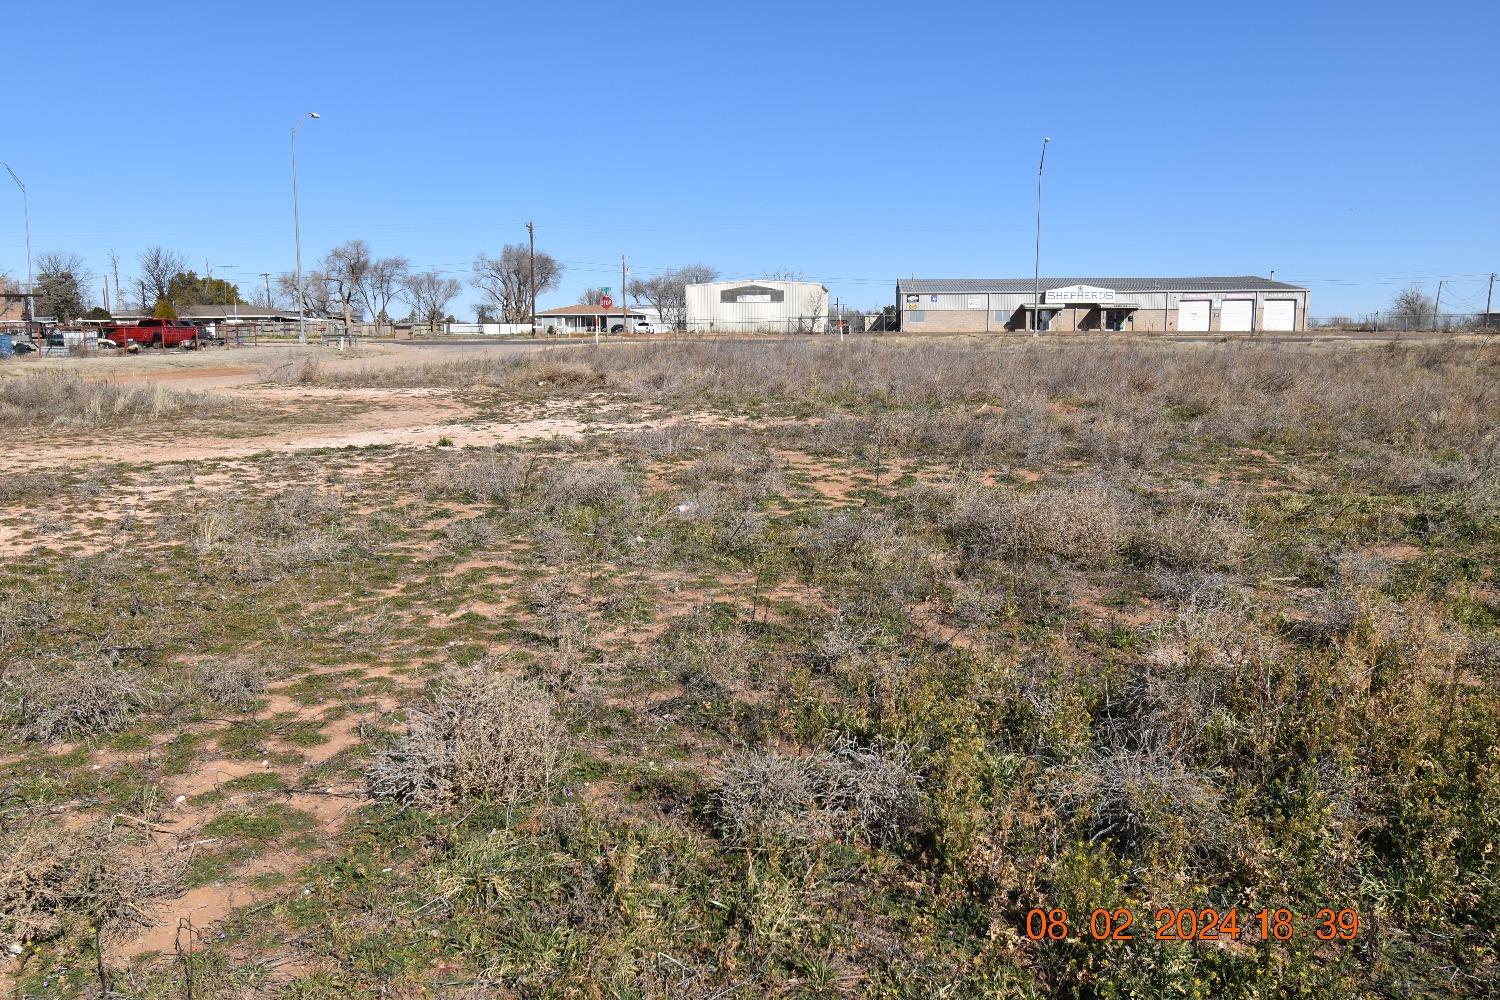 1.0 acre lot, partially cleared vacant land. the lot is between two residential areas with existing multi-family and single family residential housing. City water is available at the NE corner of Yuma Ave and 19th Street.